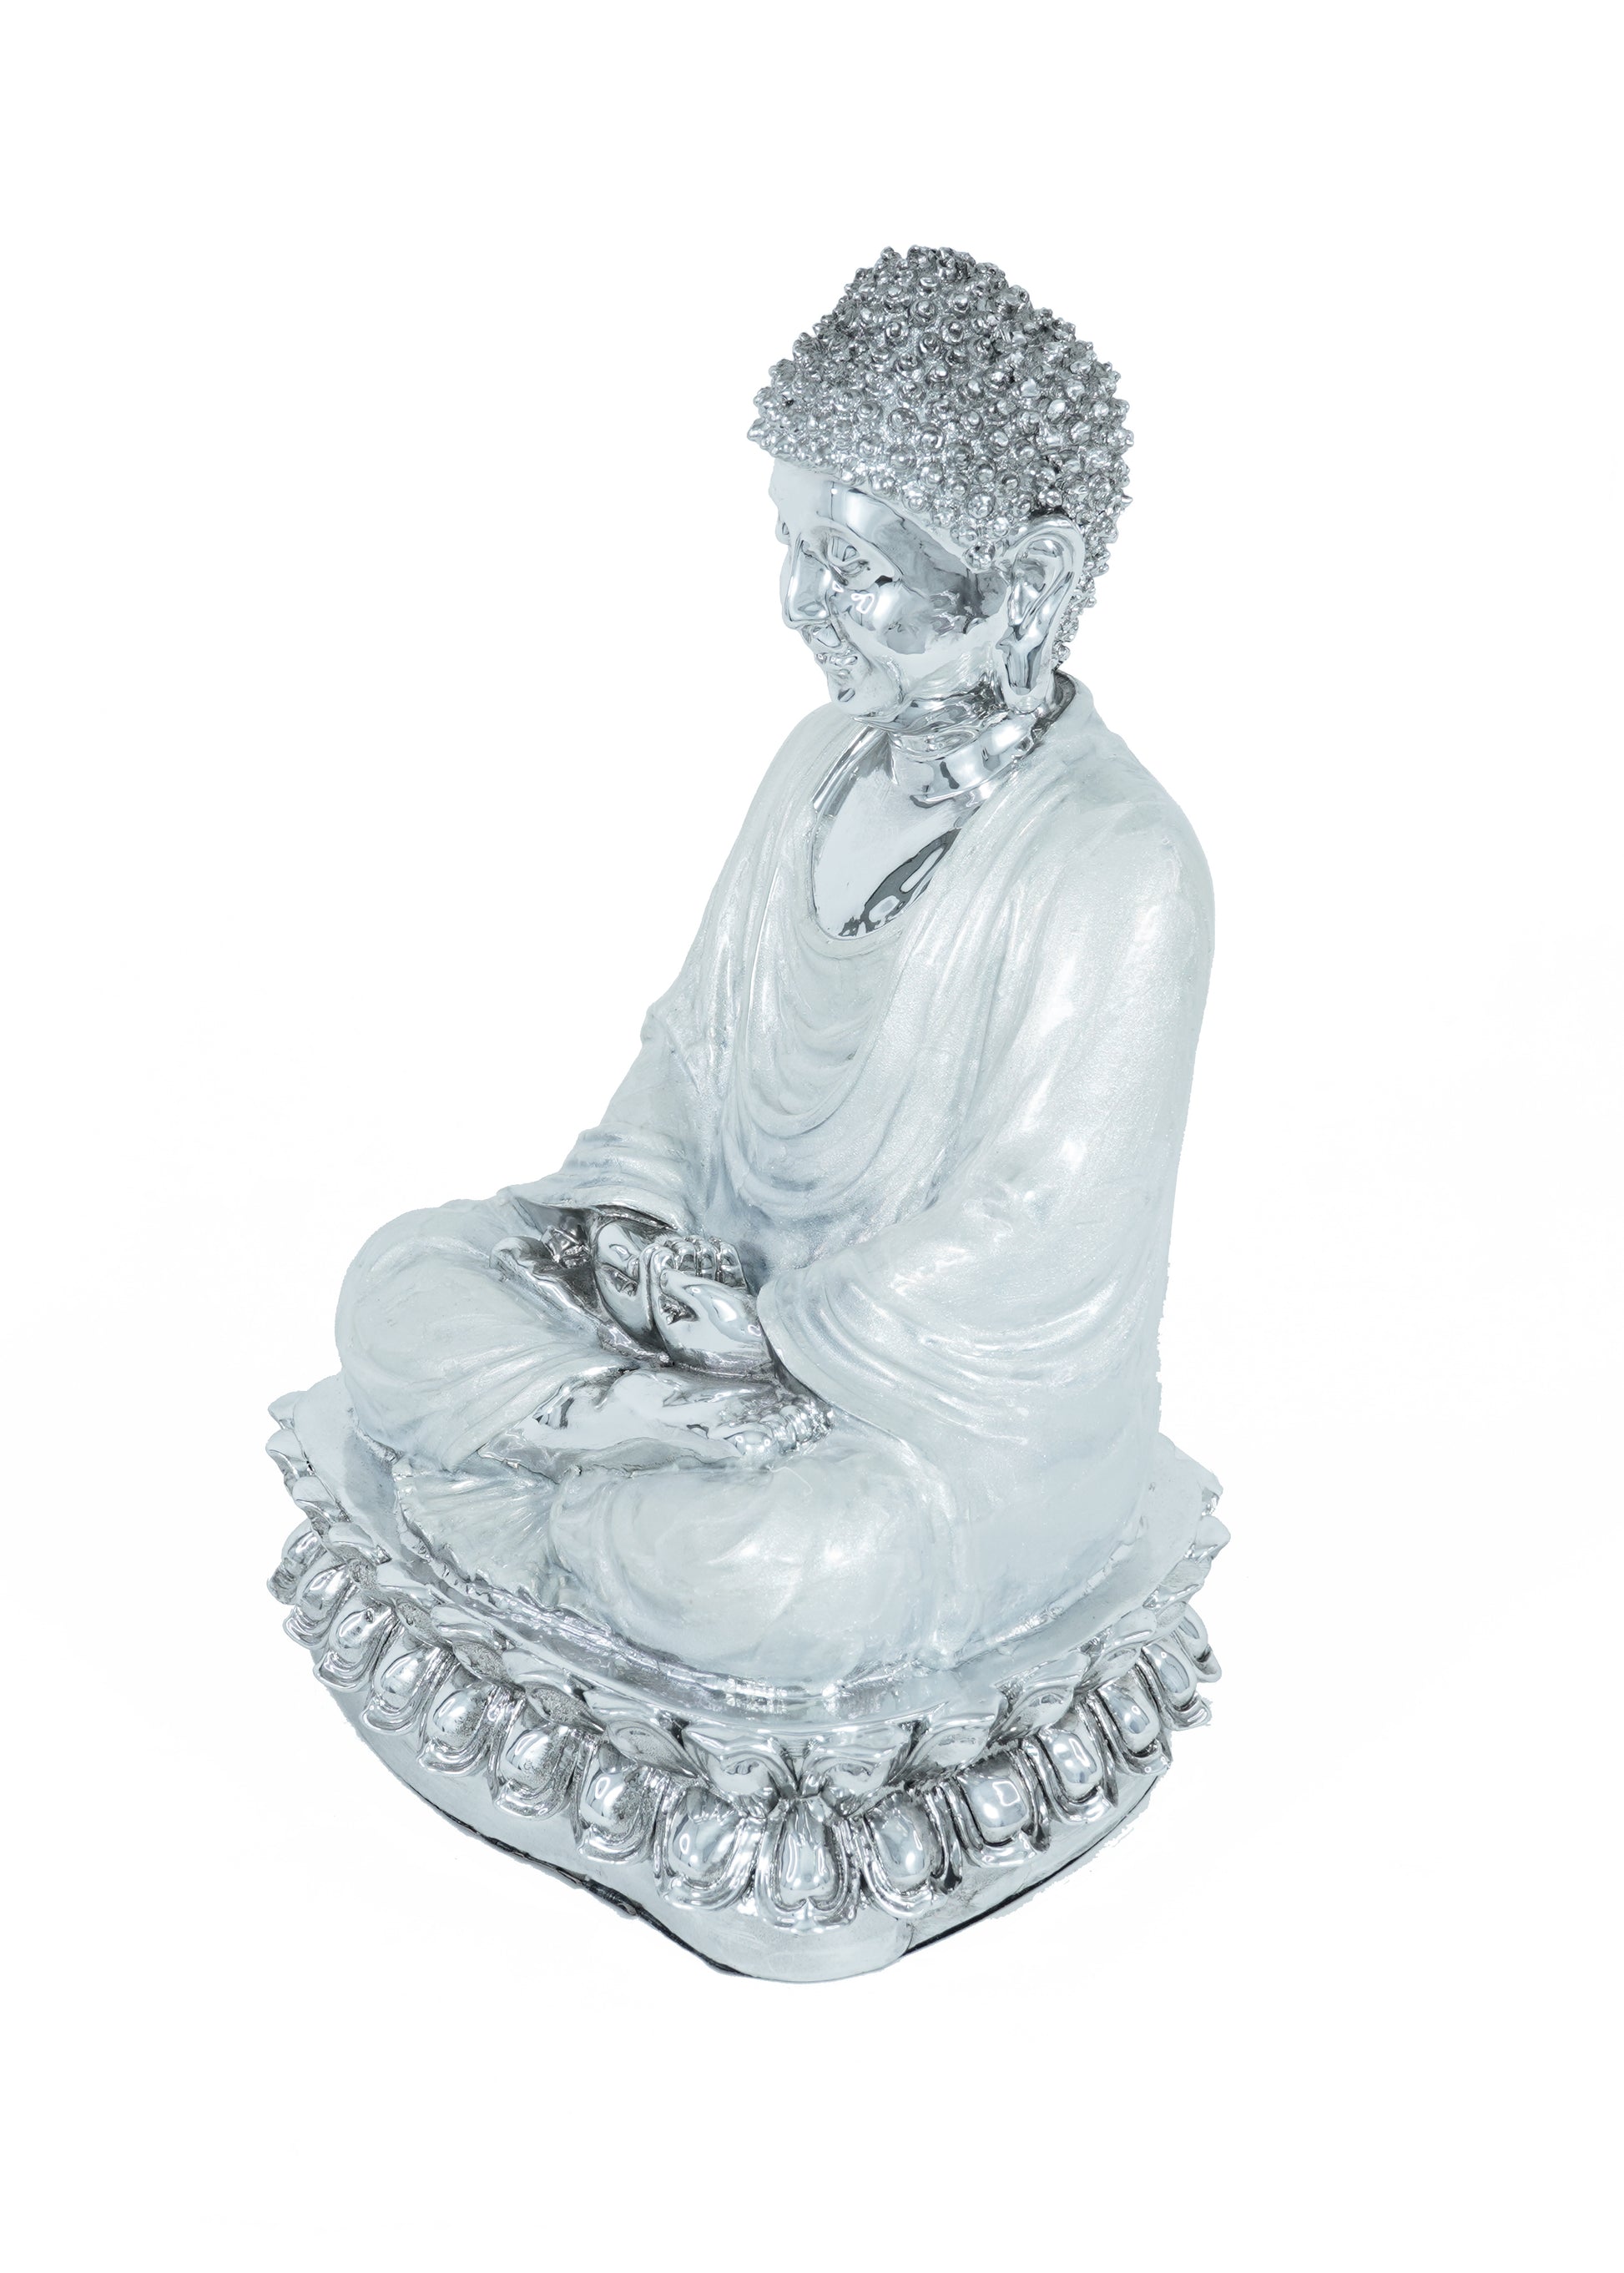 Sitting Tabletop Silver/White Buddha Sculpture - Expo Home Decor